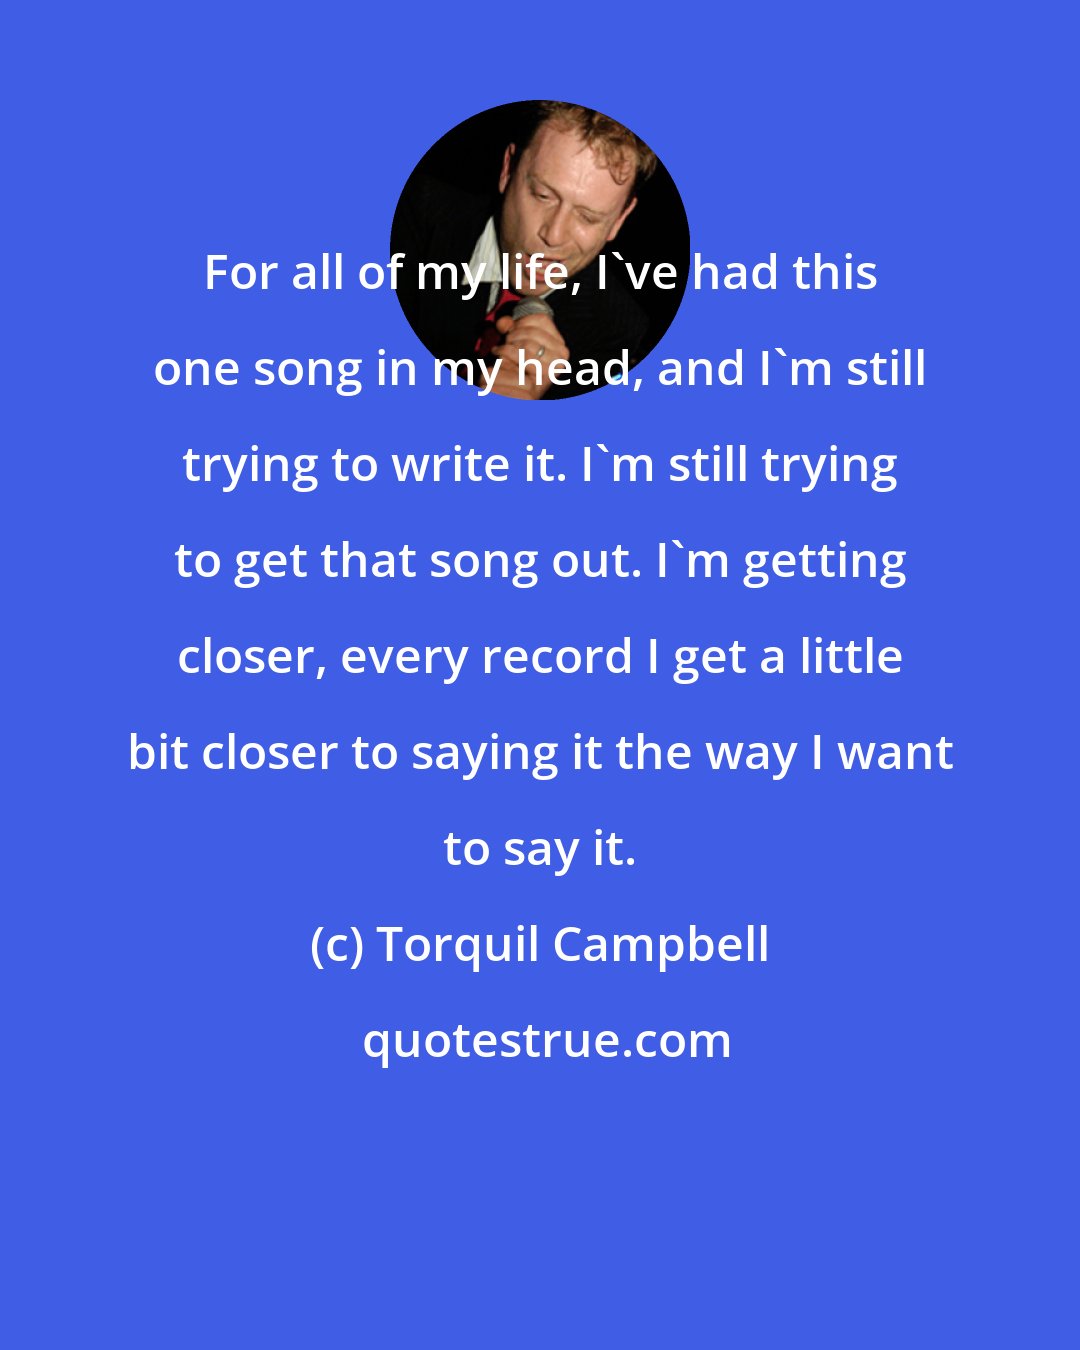 Torquil Campbell: For all of my life, I've had this one song in my head, and I'm still trying to write it. I'm still trying to get that song out. I'm getting closer, every record I get a little bit closer to saying it the way I want to say it.